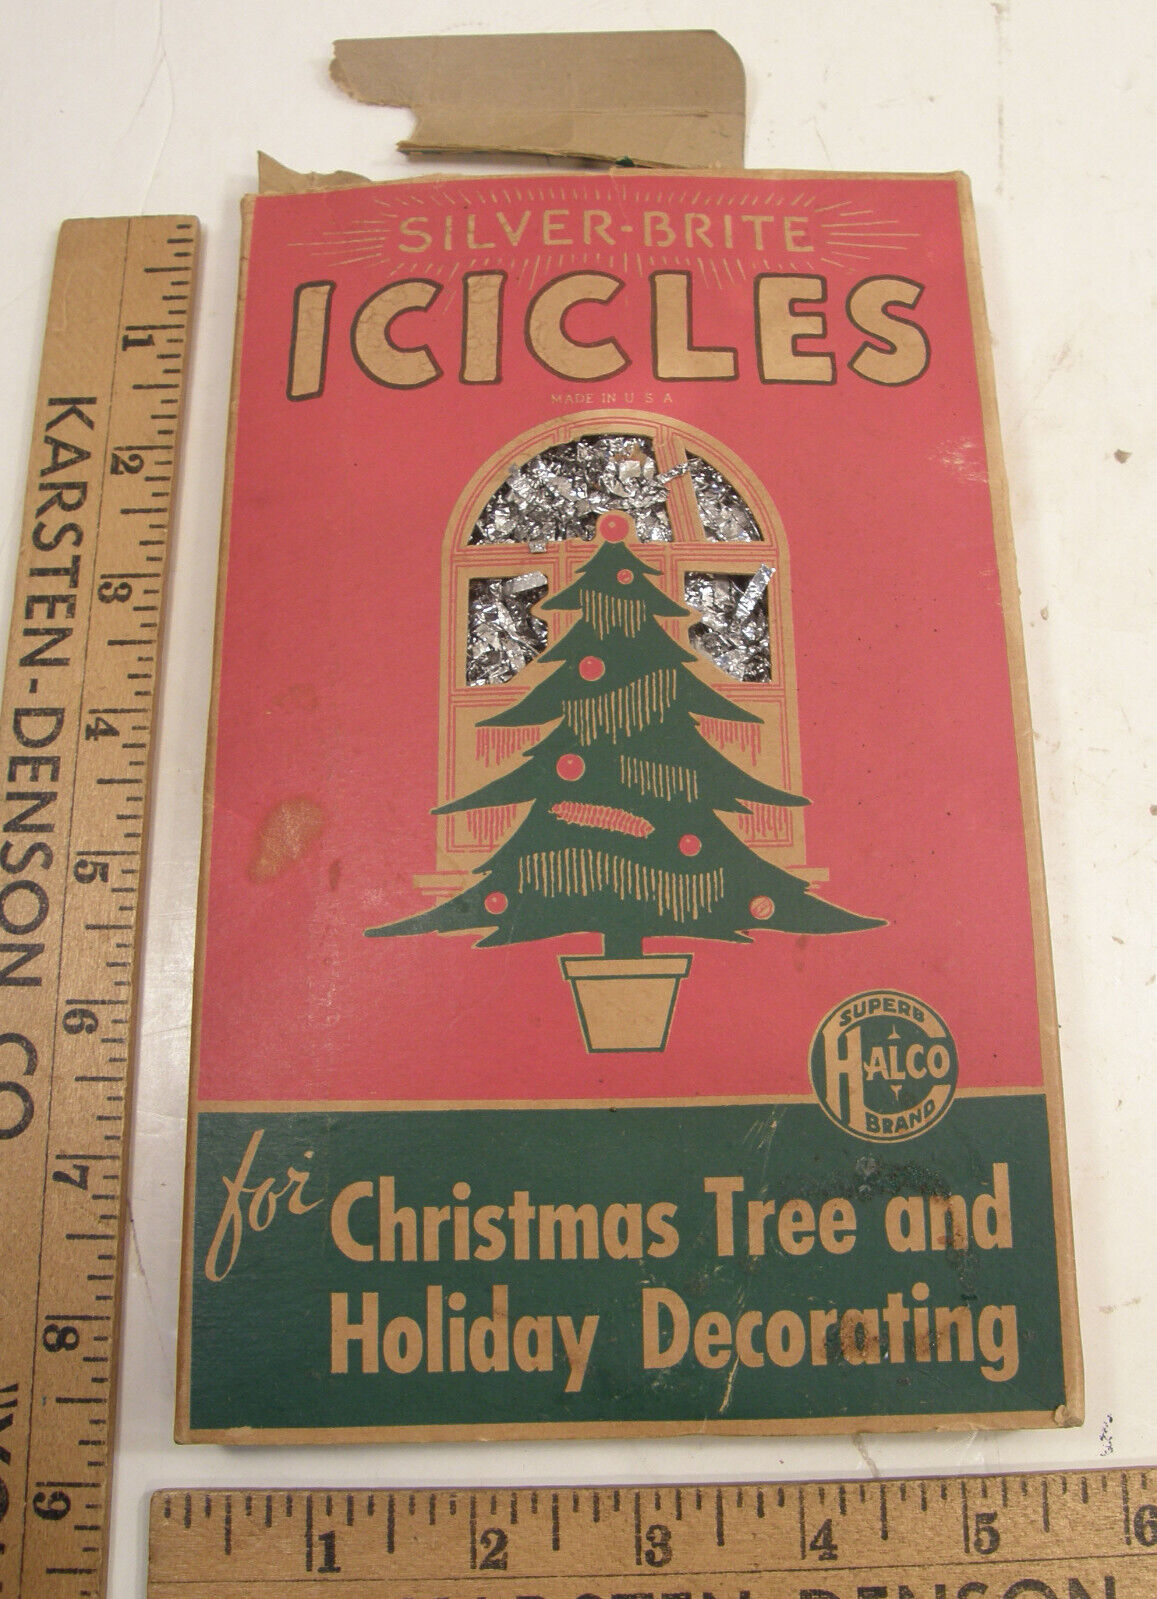 VINTAGE 1940'S FULL BOX HALCO SILVER BRITE ICICLES CHRISTMAS TREE TINSEL STRANDS